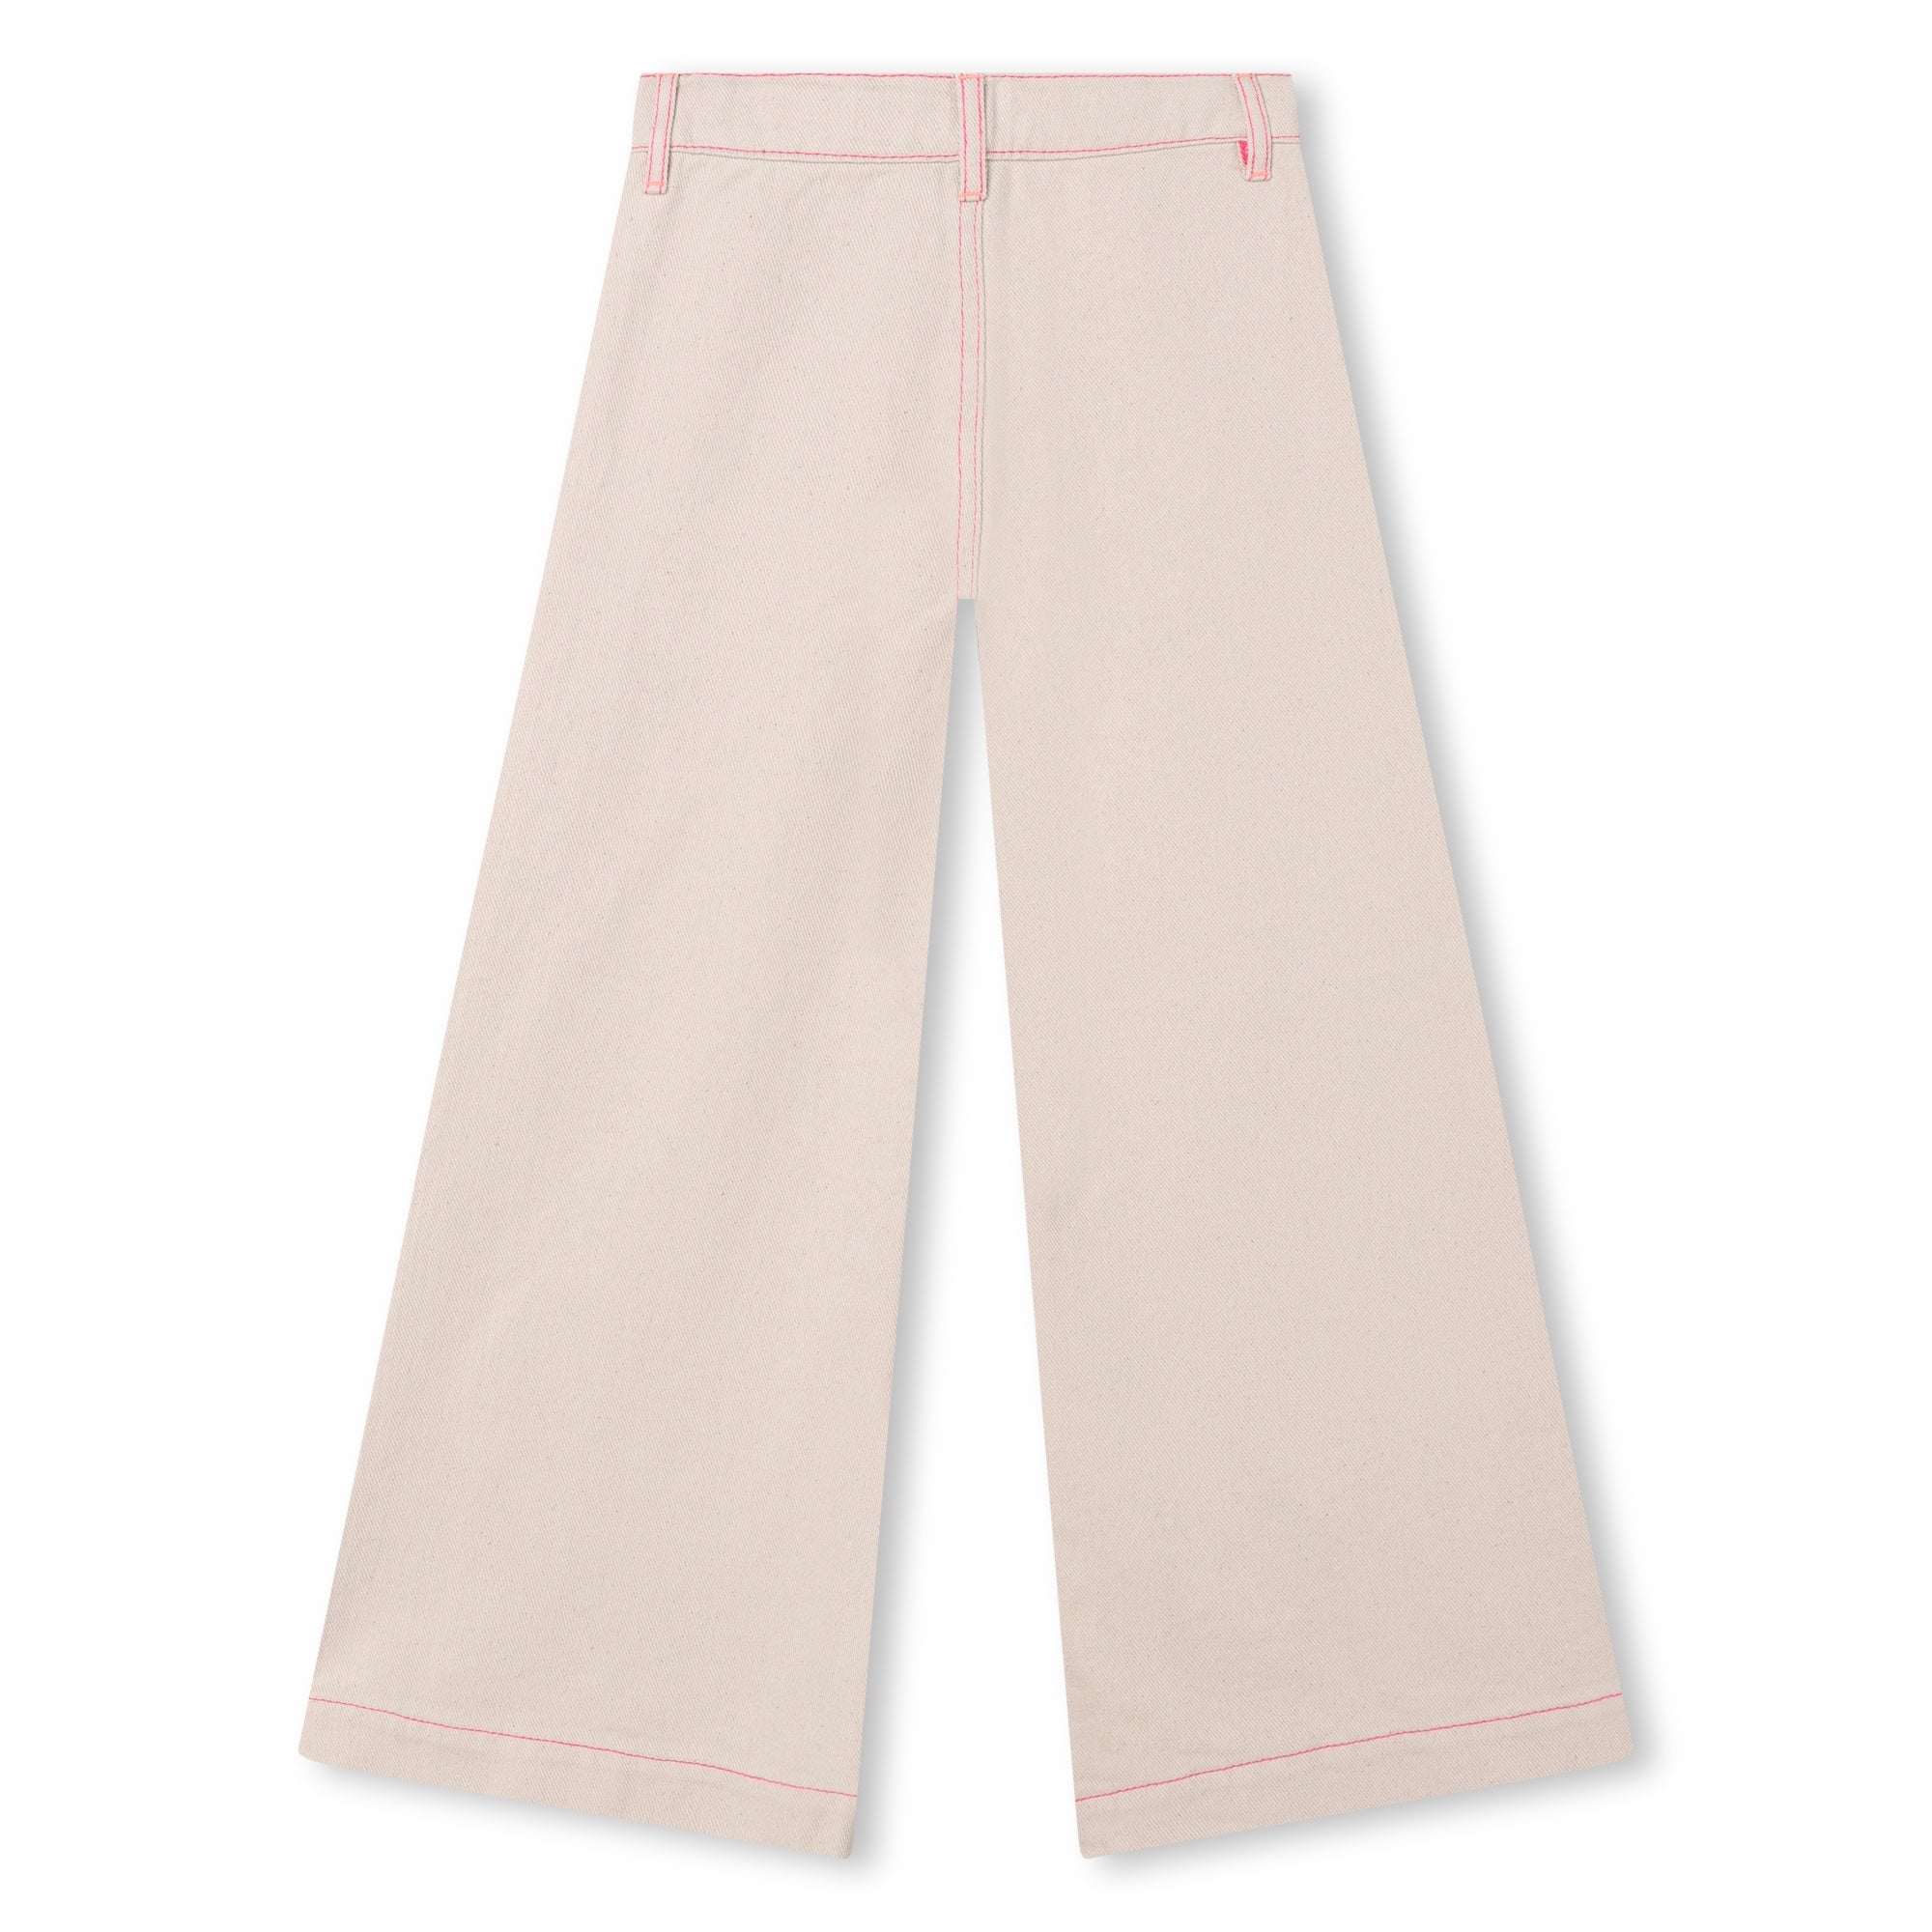 Girls White Embroidered Cotton Trousers